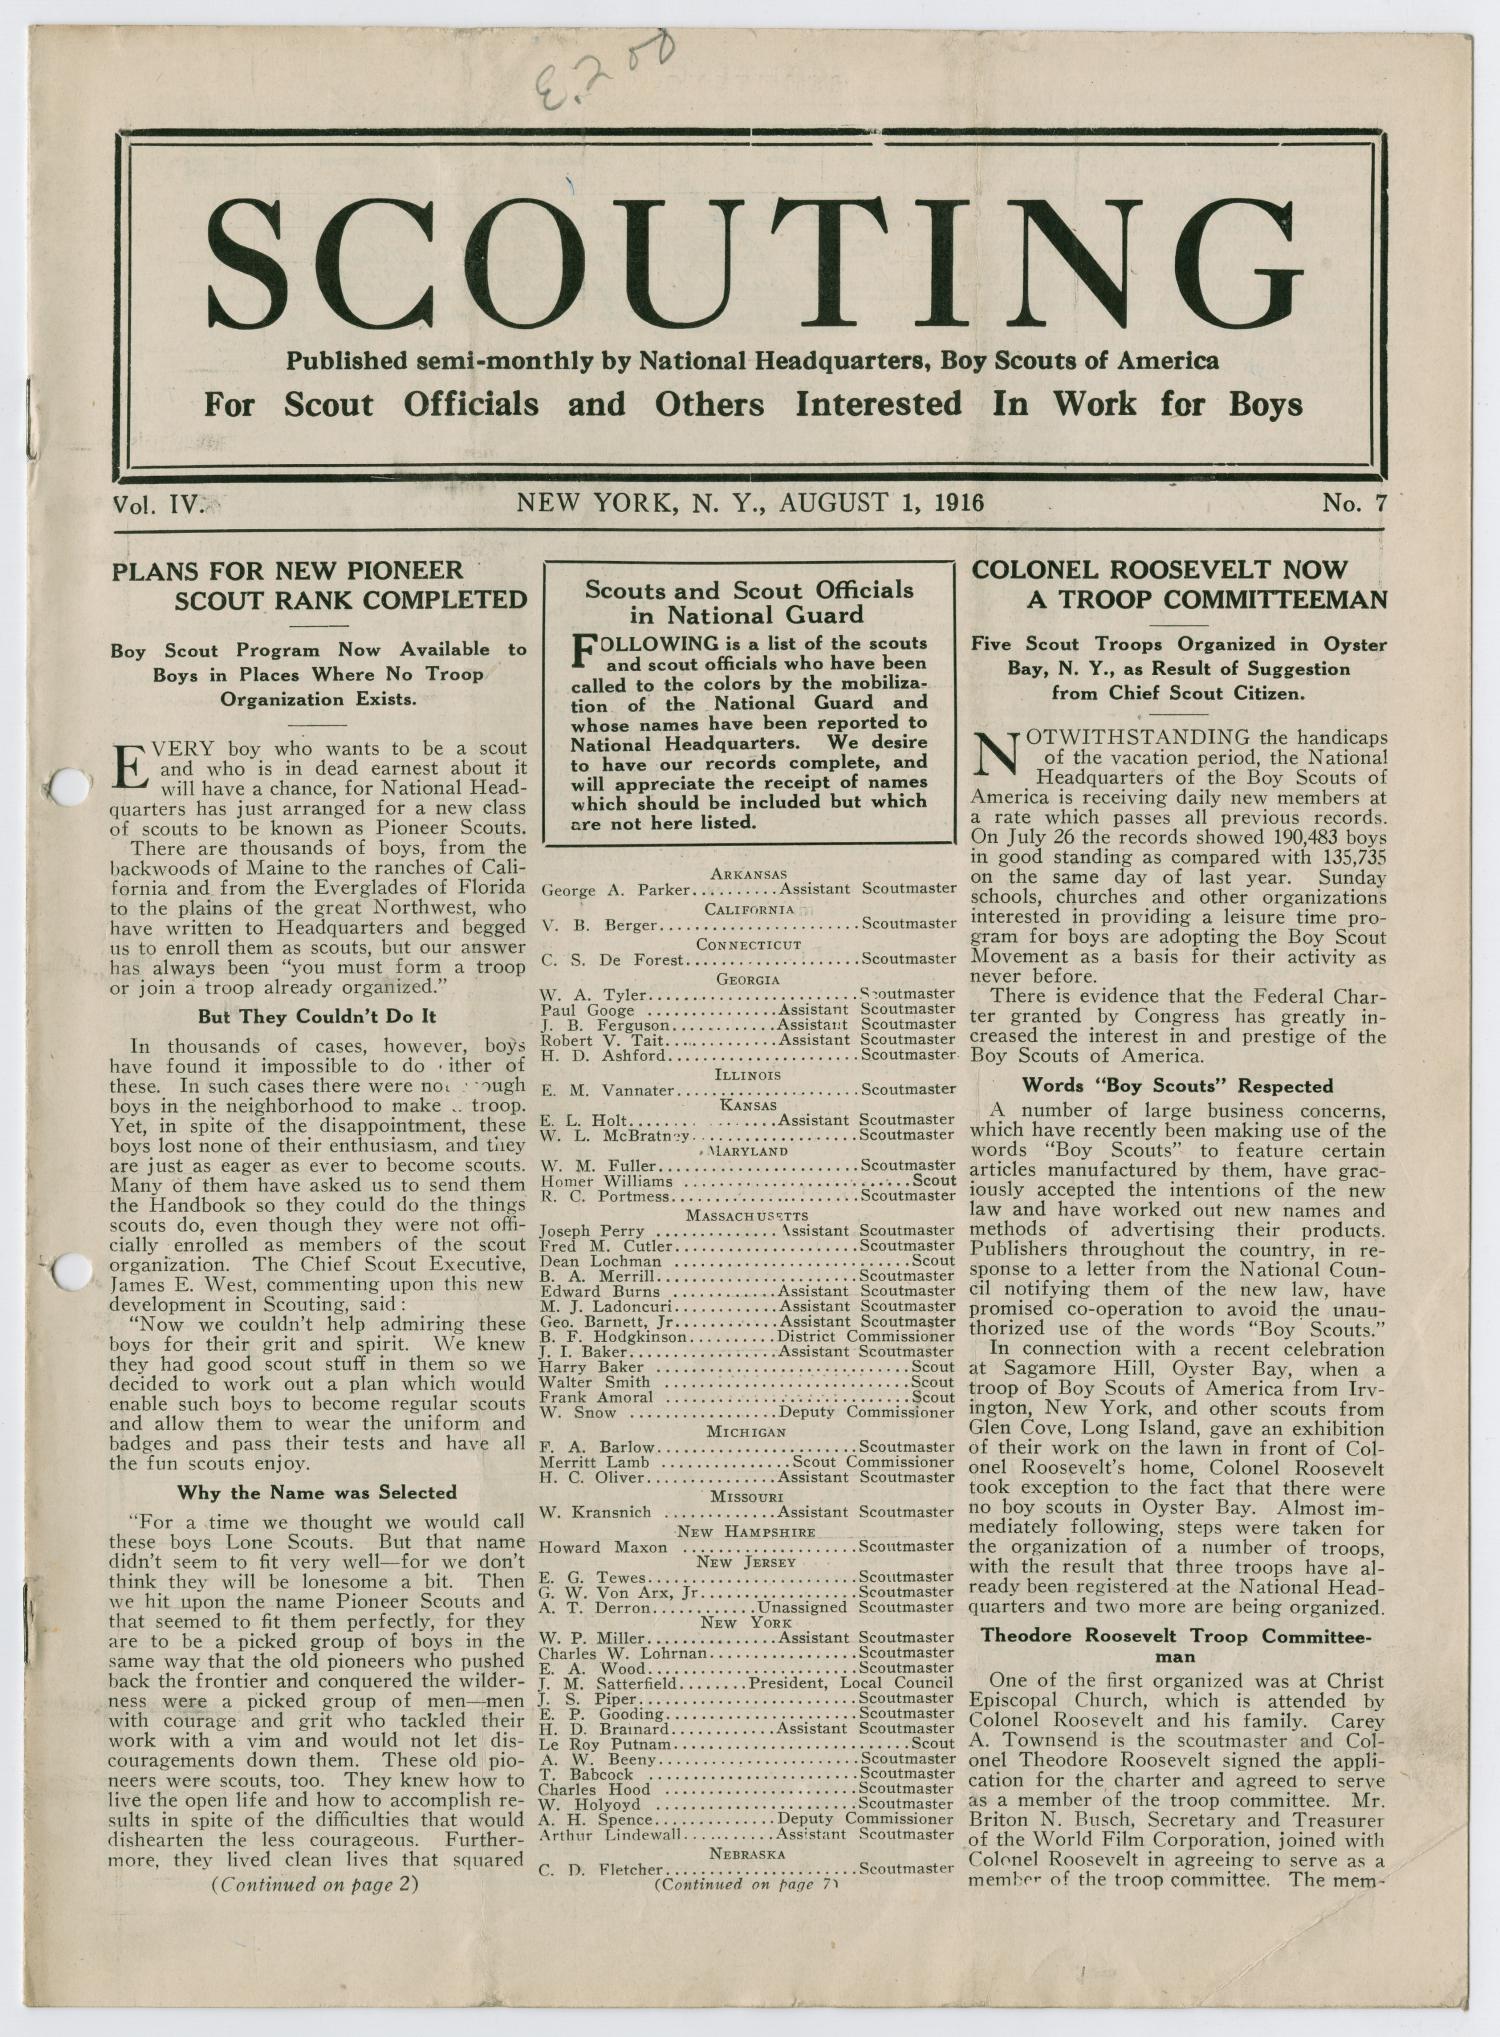 Scouting, Volume 4, Number 7, August 1, 1916
                                                
                                                    1
                                                